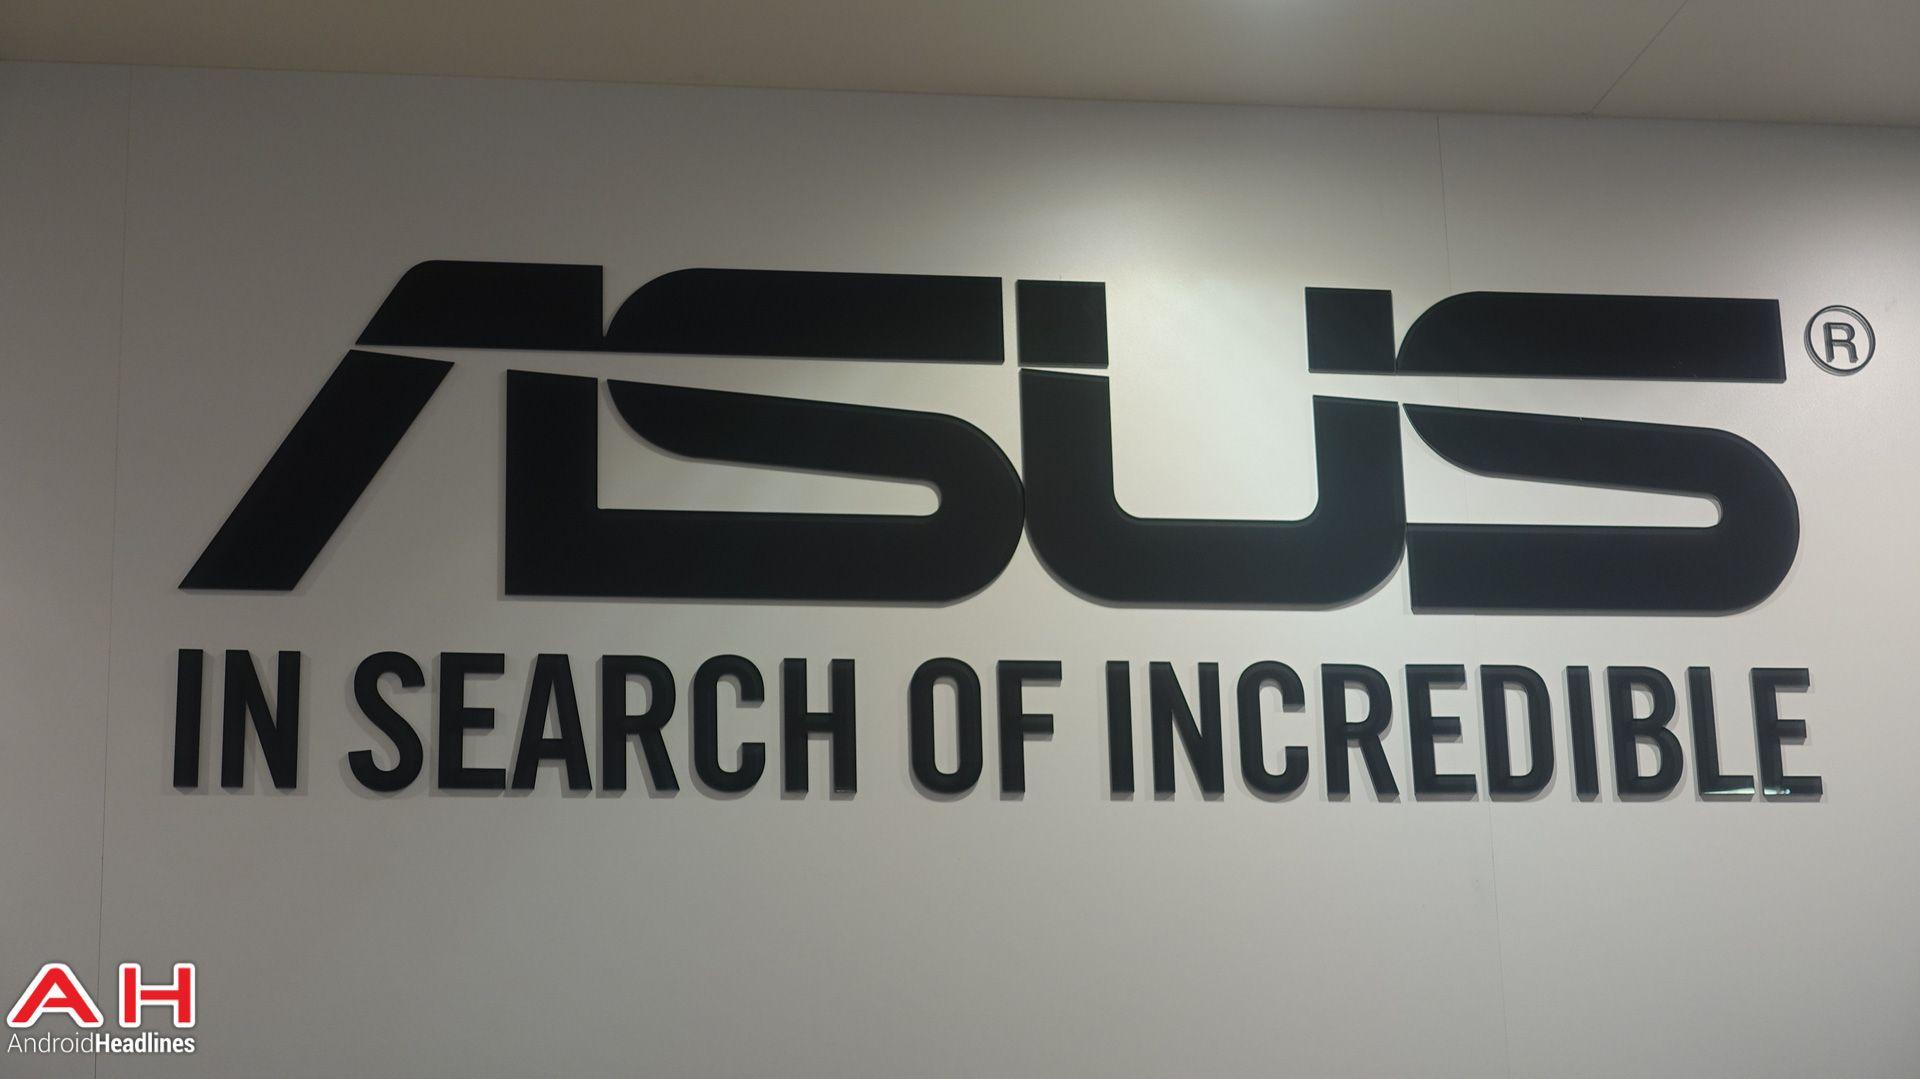 Asus Company Logo - ASUS Lowers Q2 Revenue Goal As Smartphone Demand Drops | Android ...